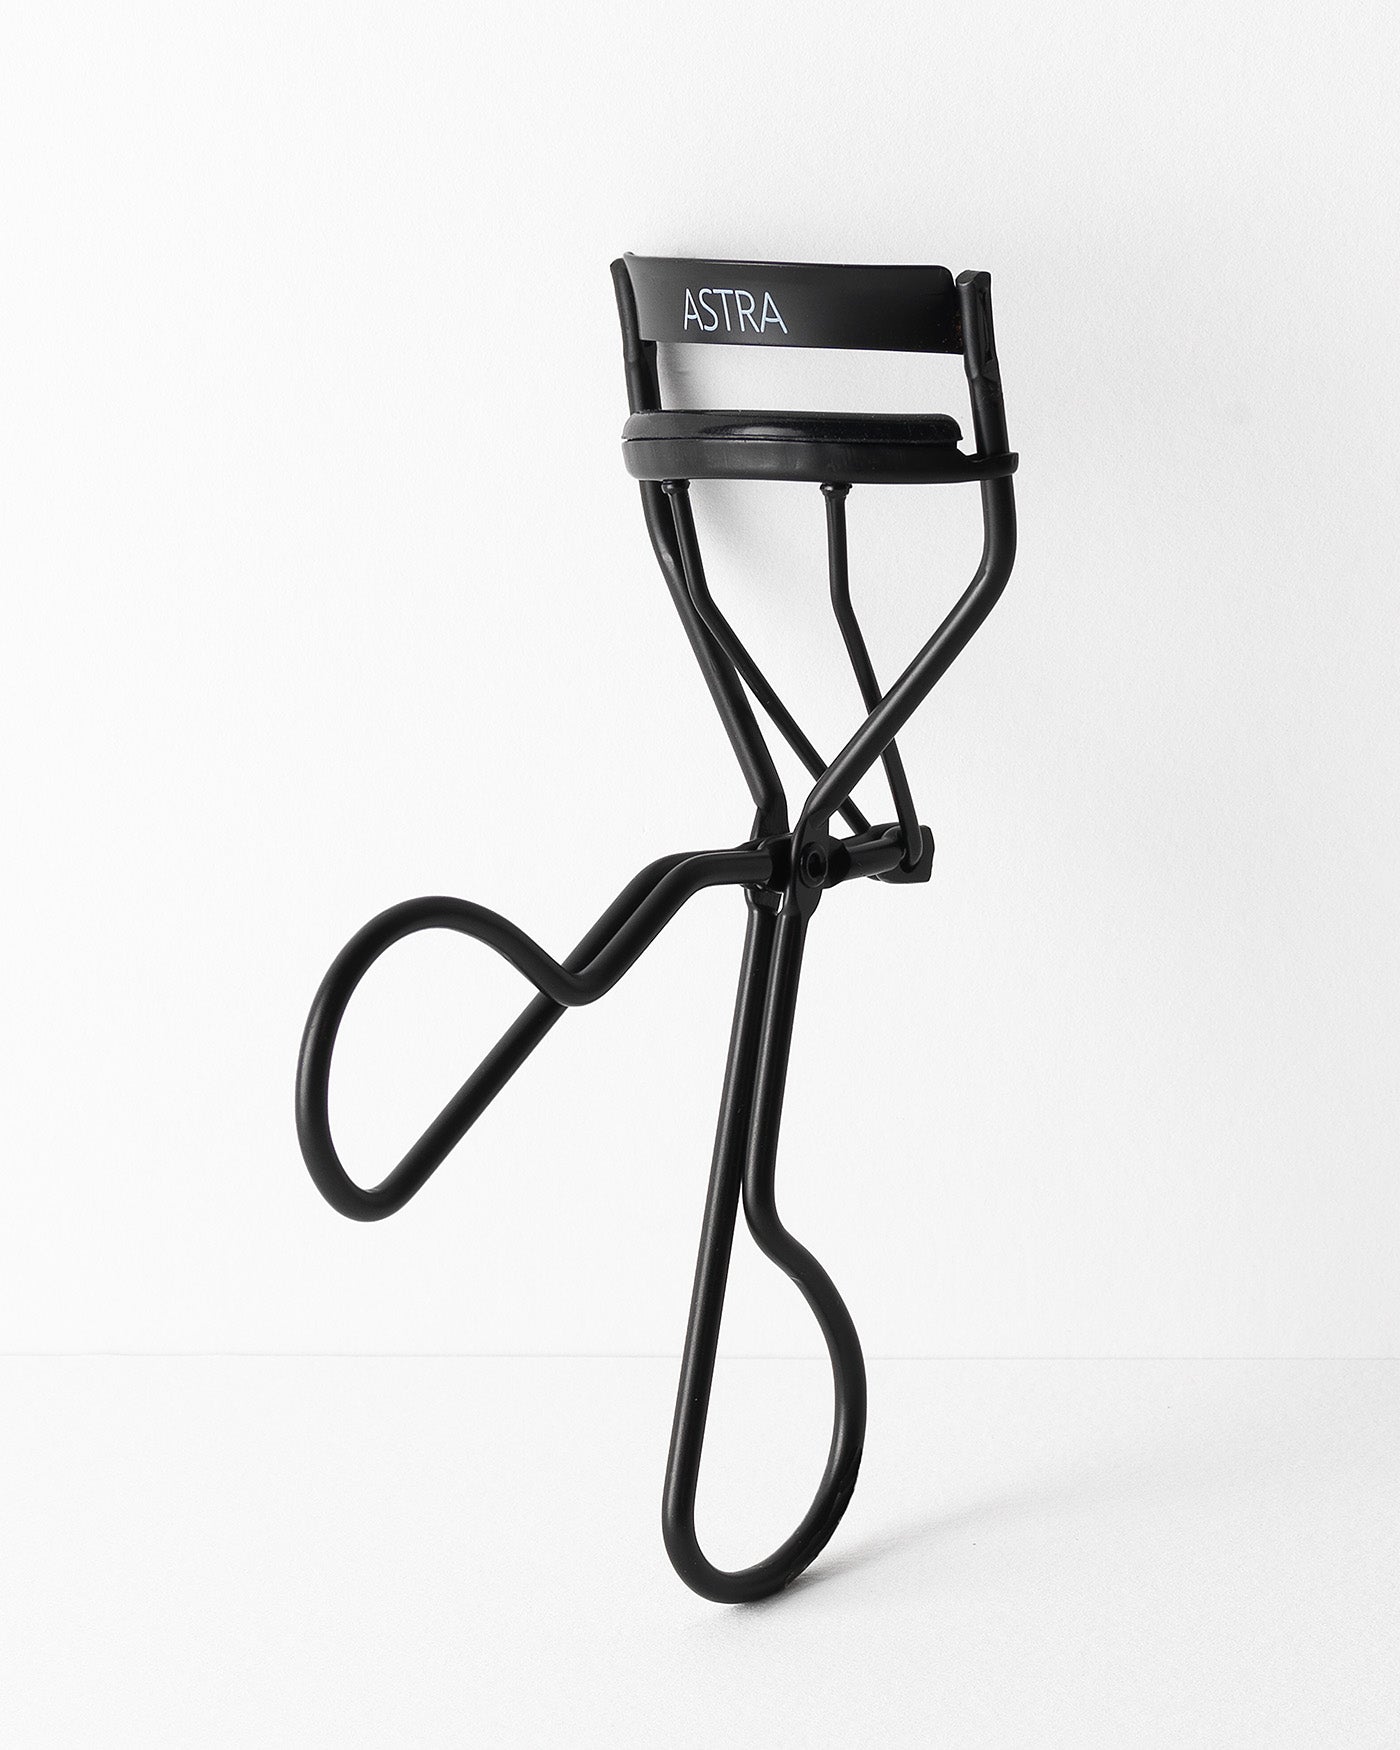 EYELASH CURLER - All Products - Astra Make-Up